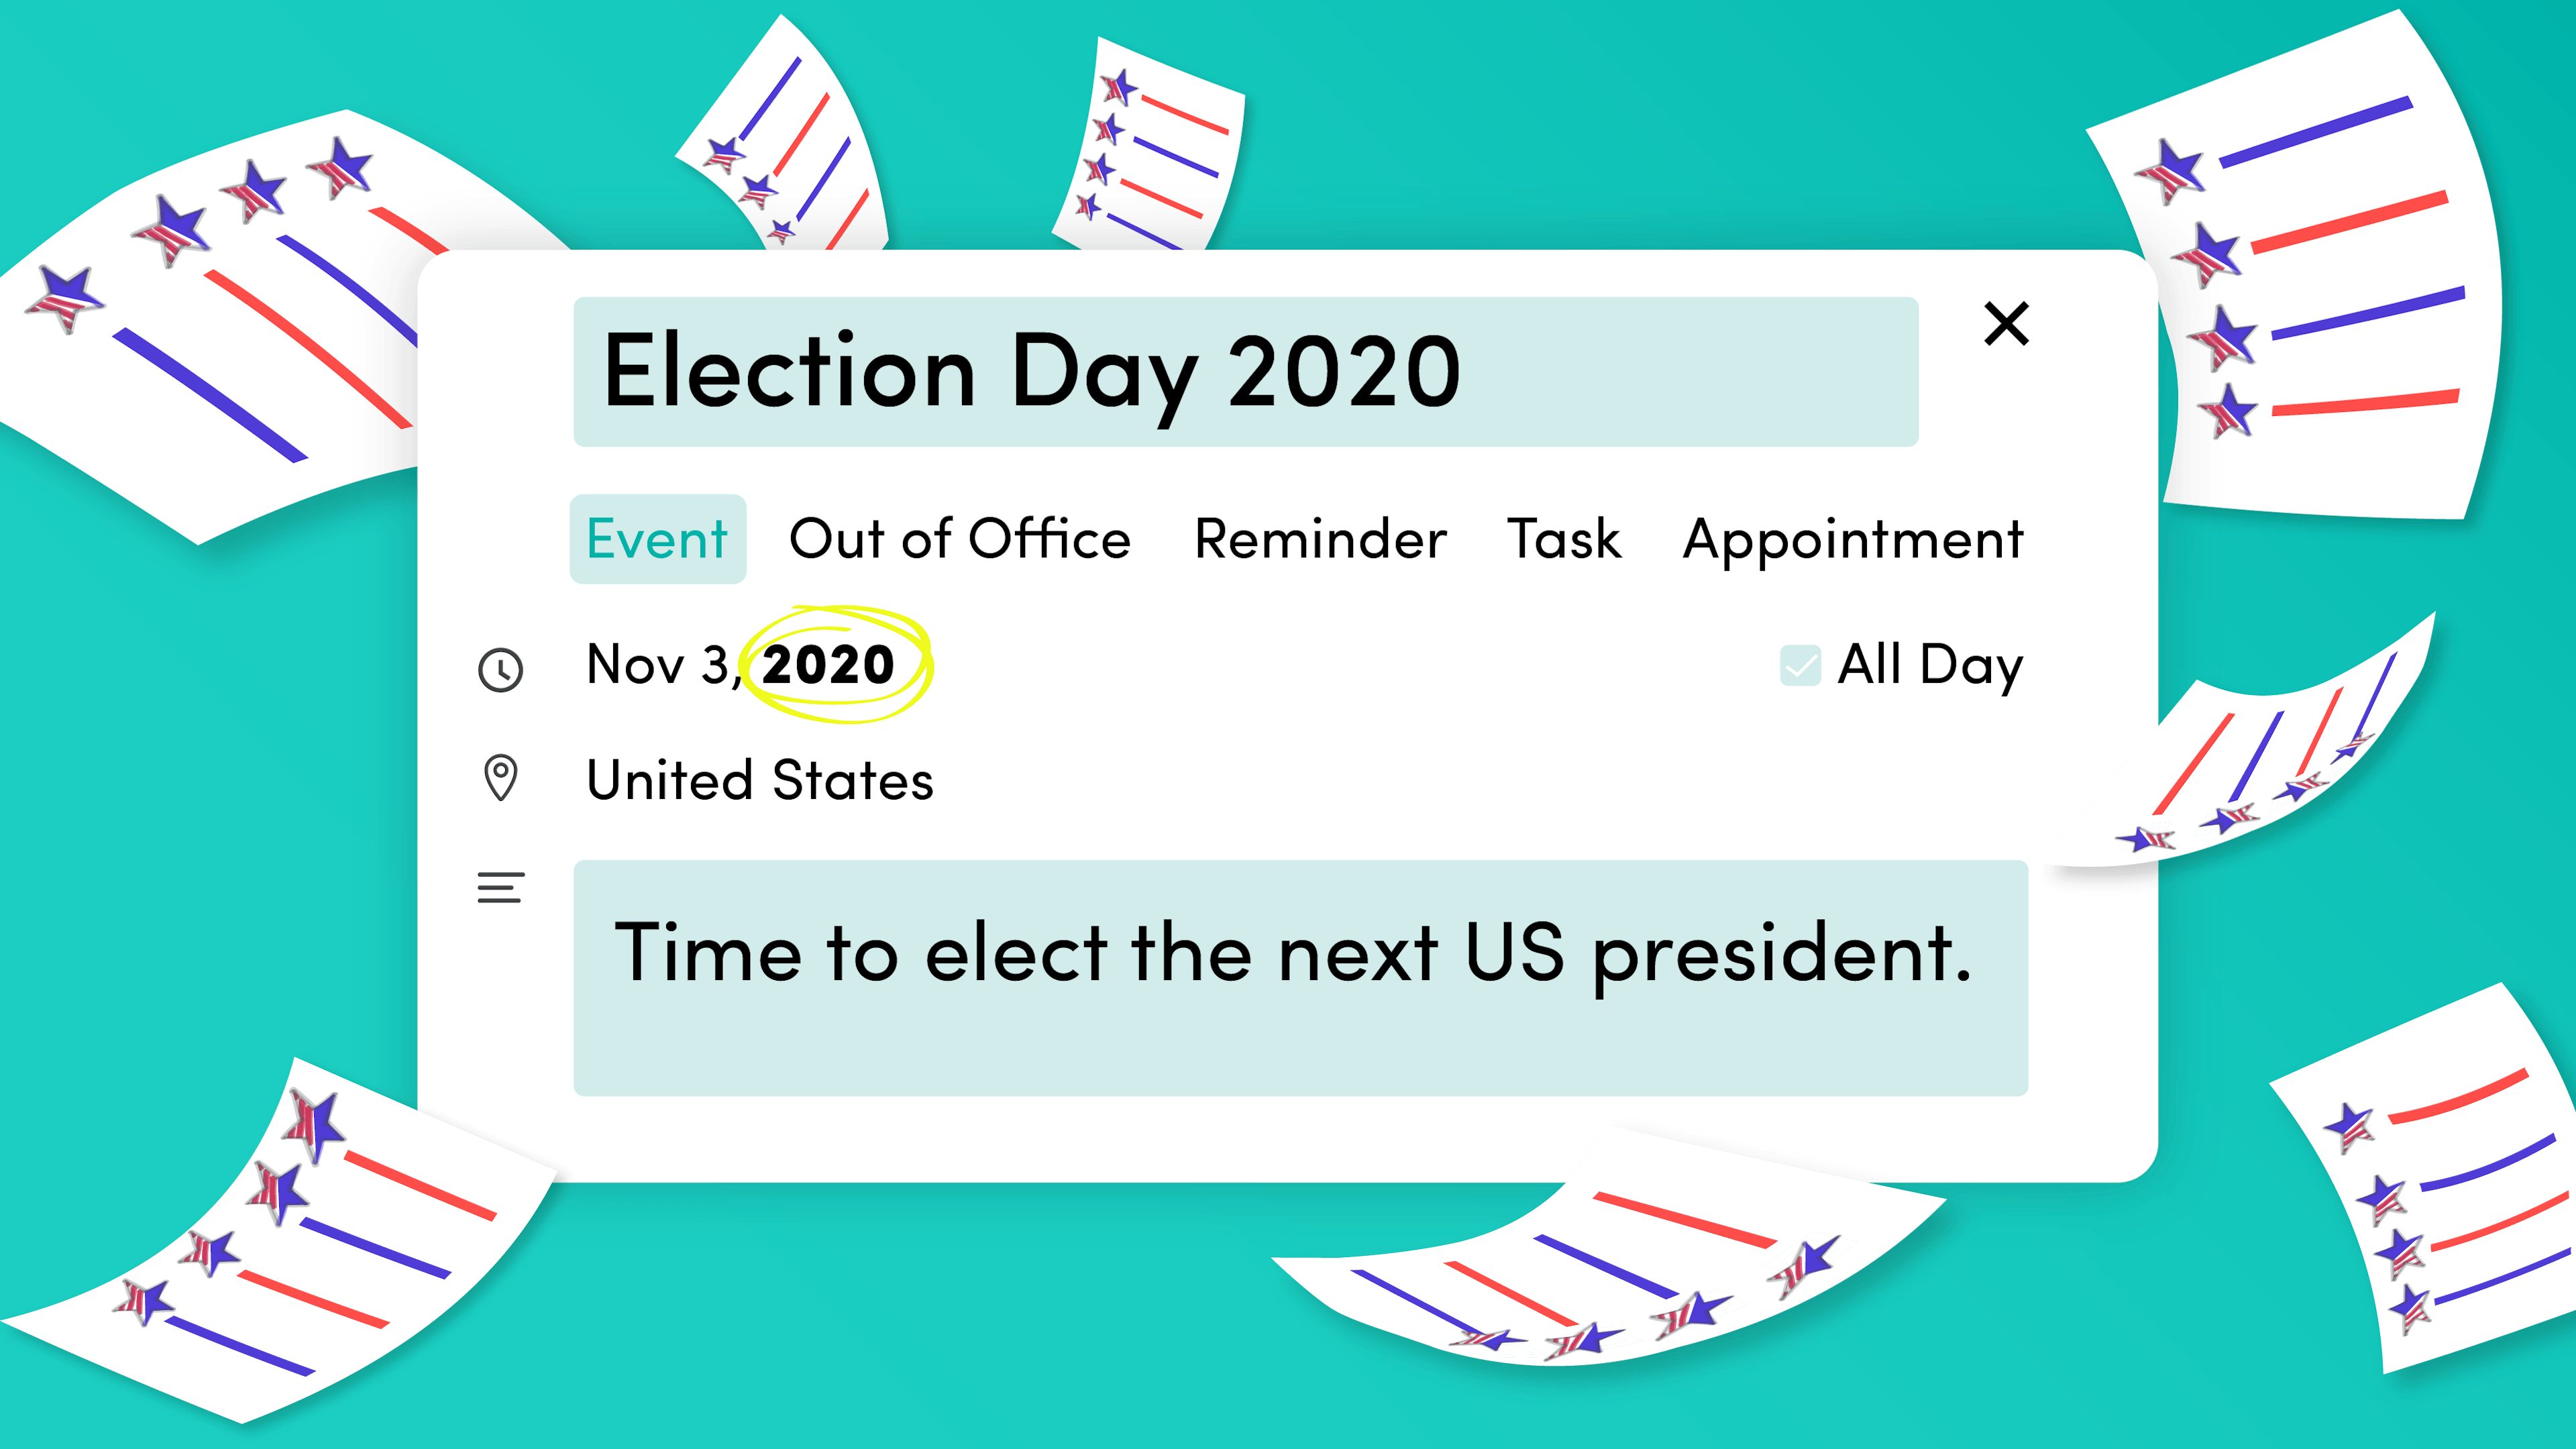 Time to elect the next US president